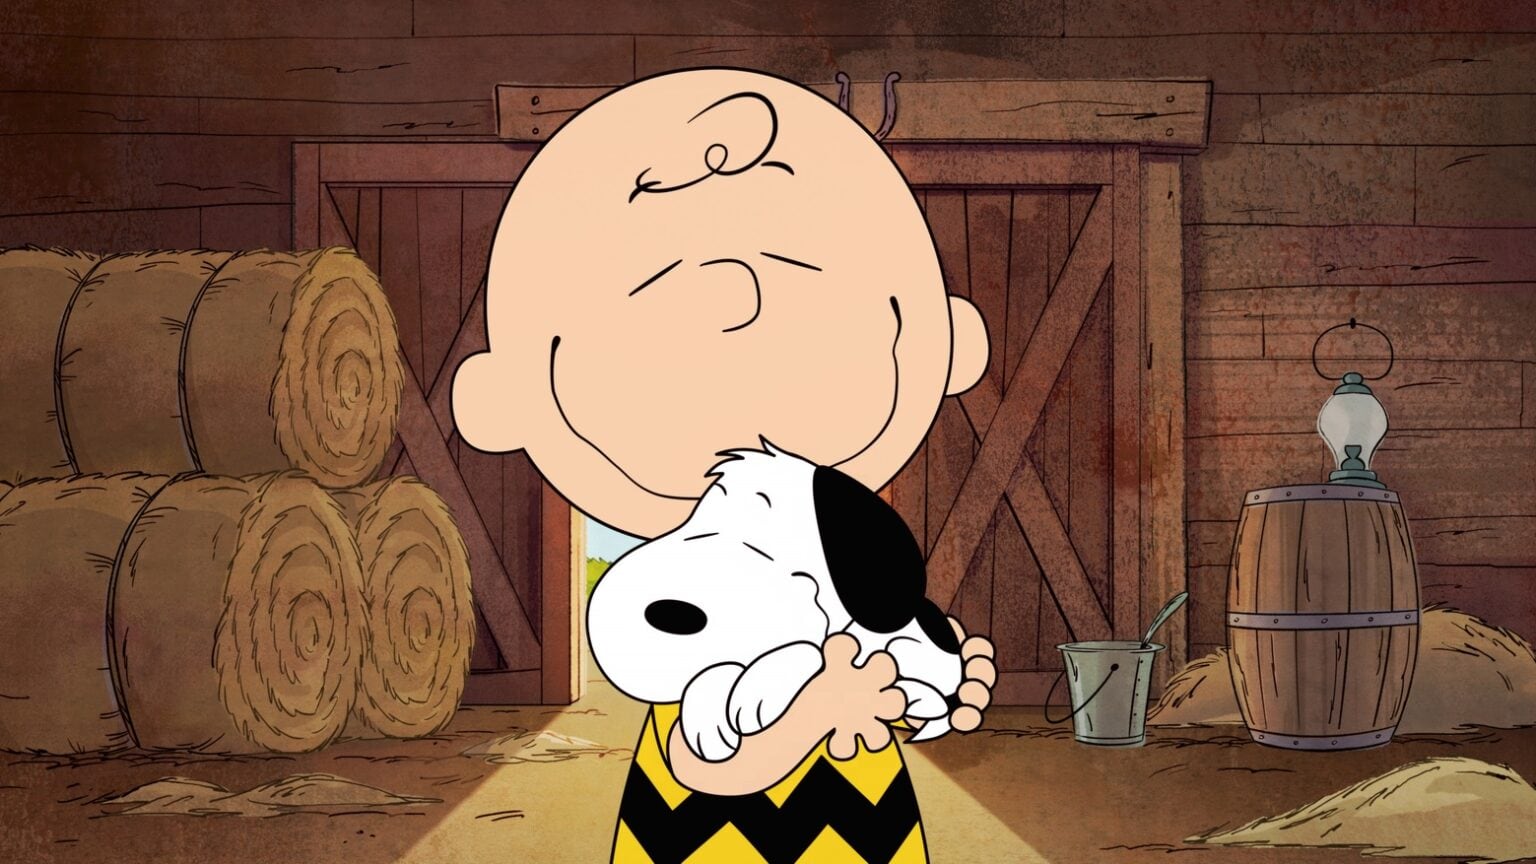 ‘The Snoopy Show’ debuts on Apple TV+ on February 5, 2021.